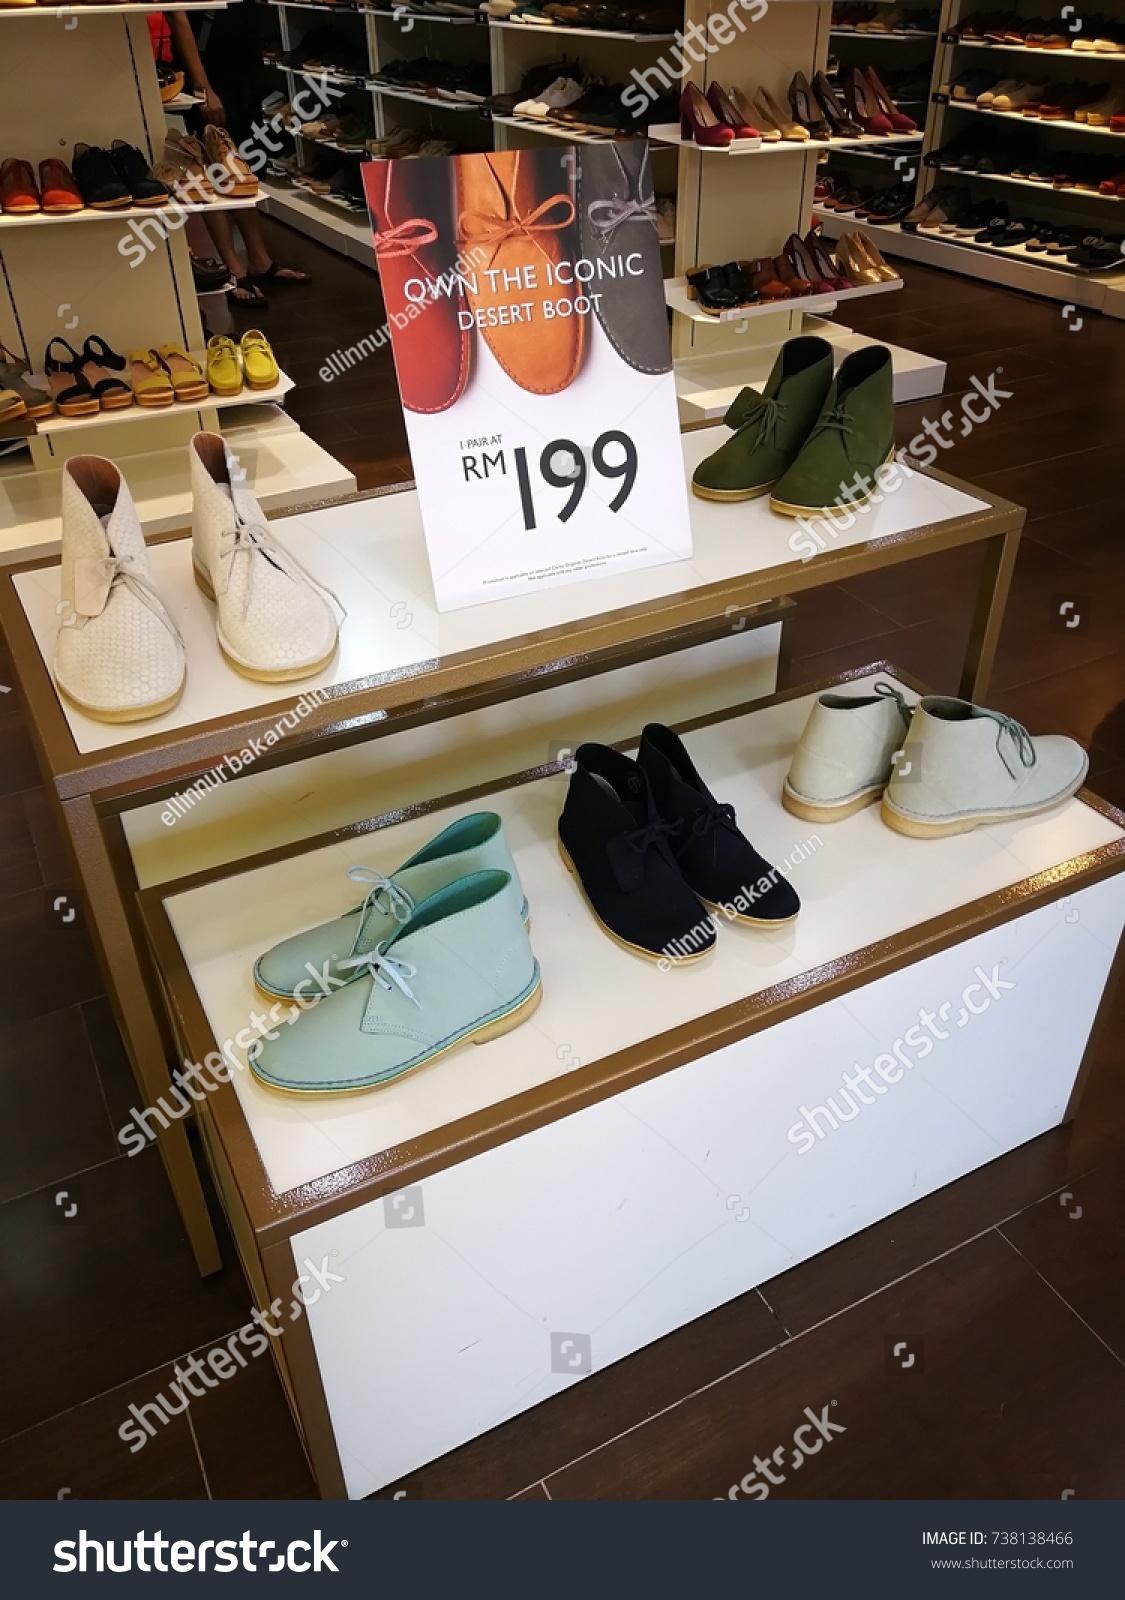 clarks first shoes malaysia